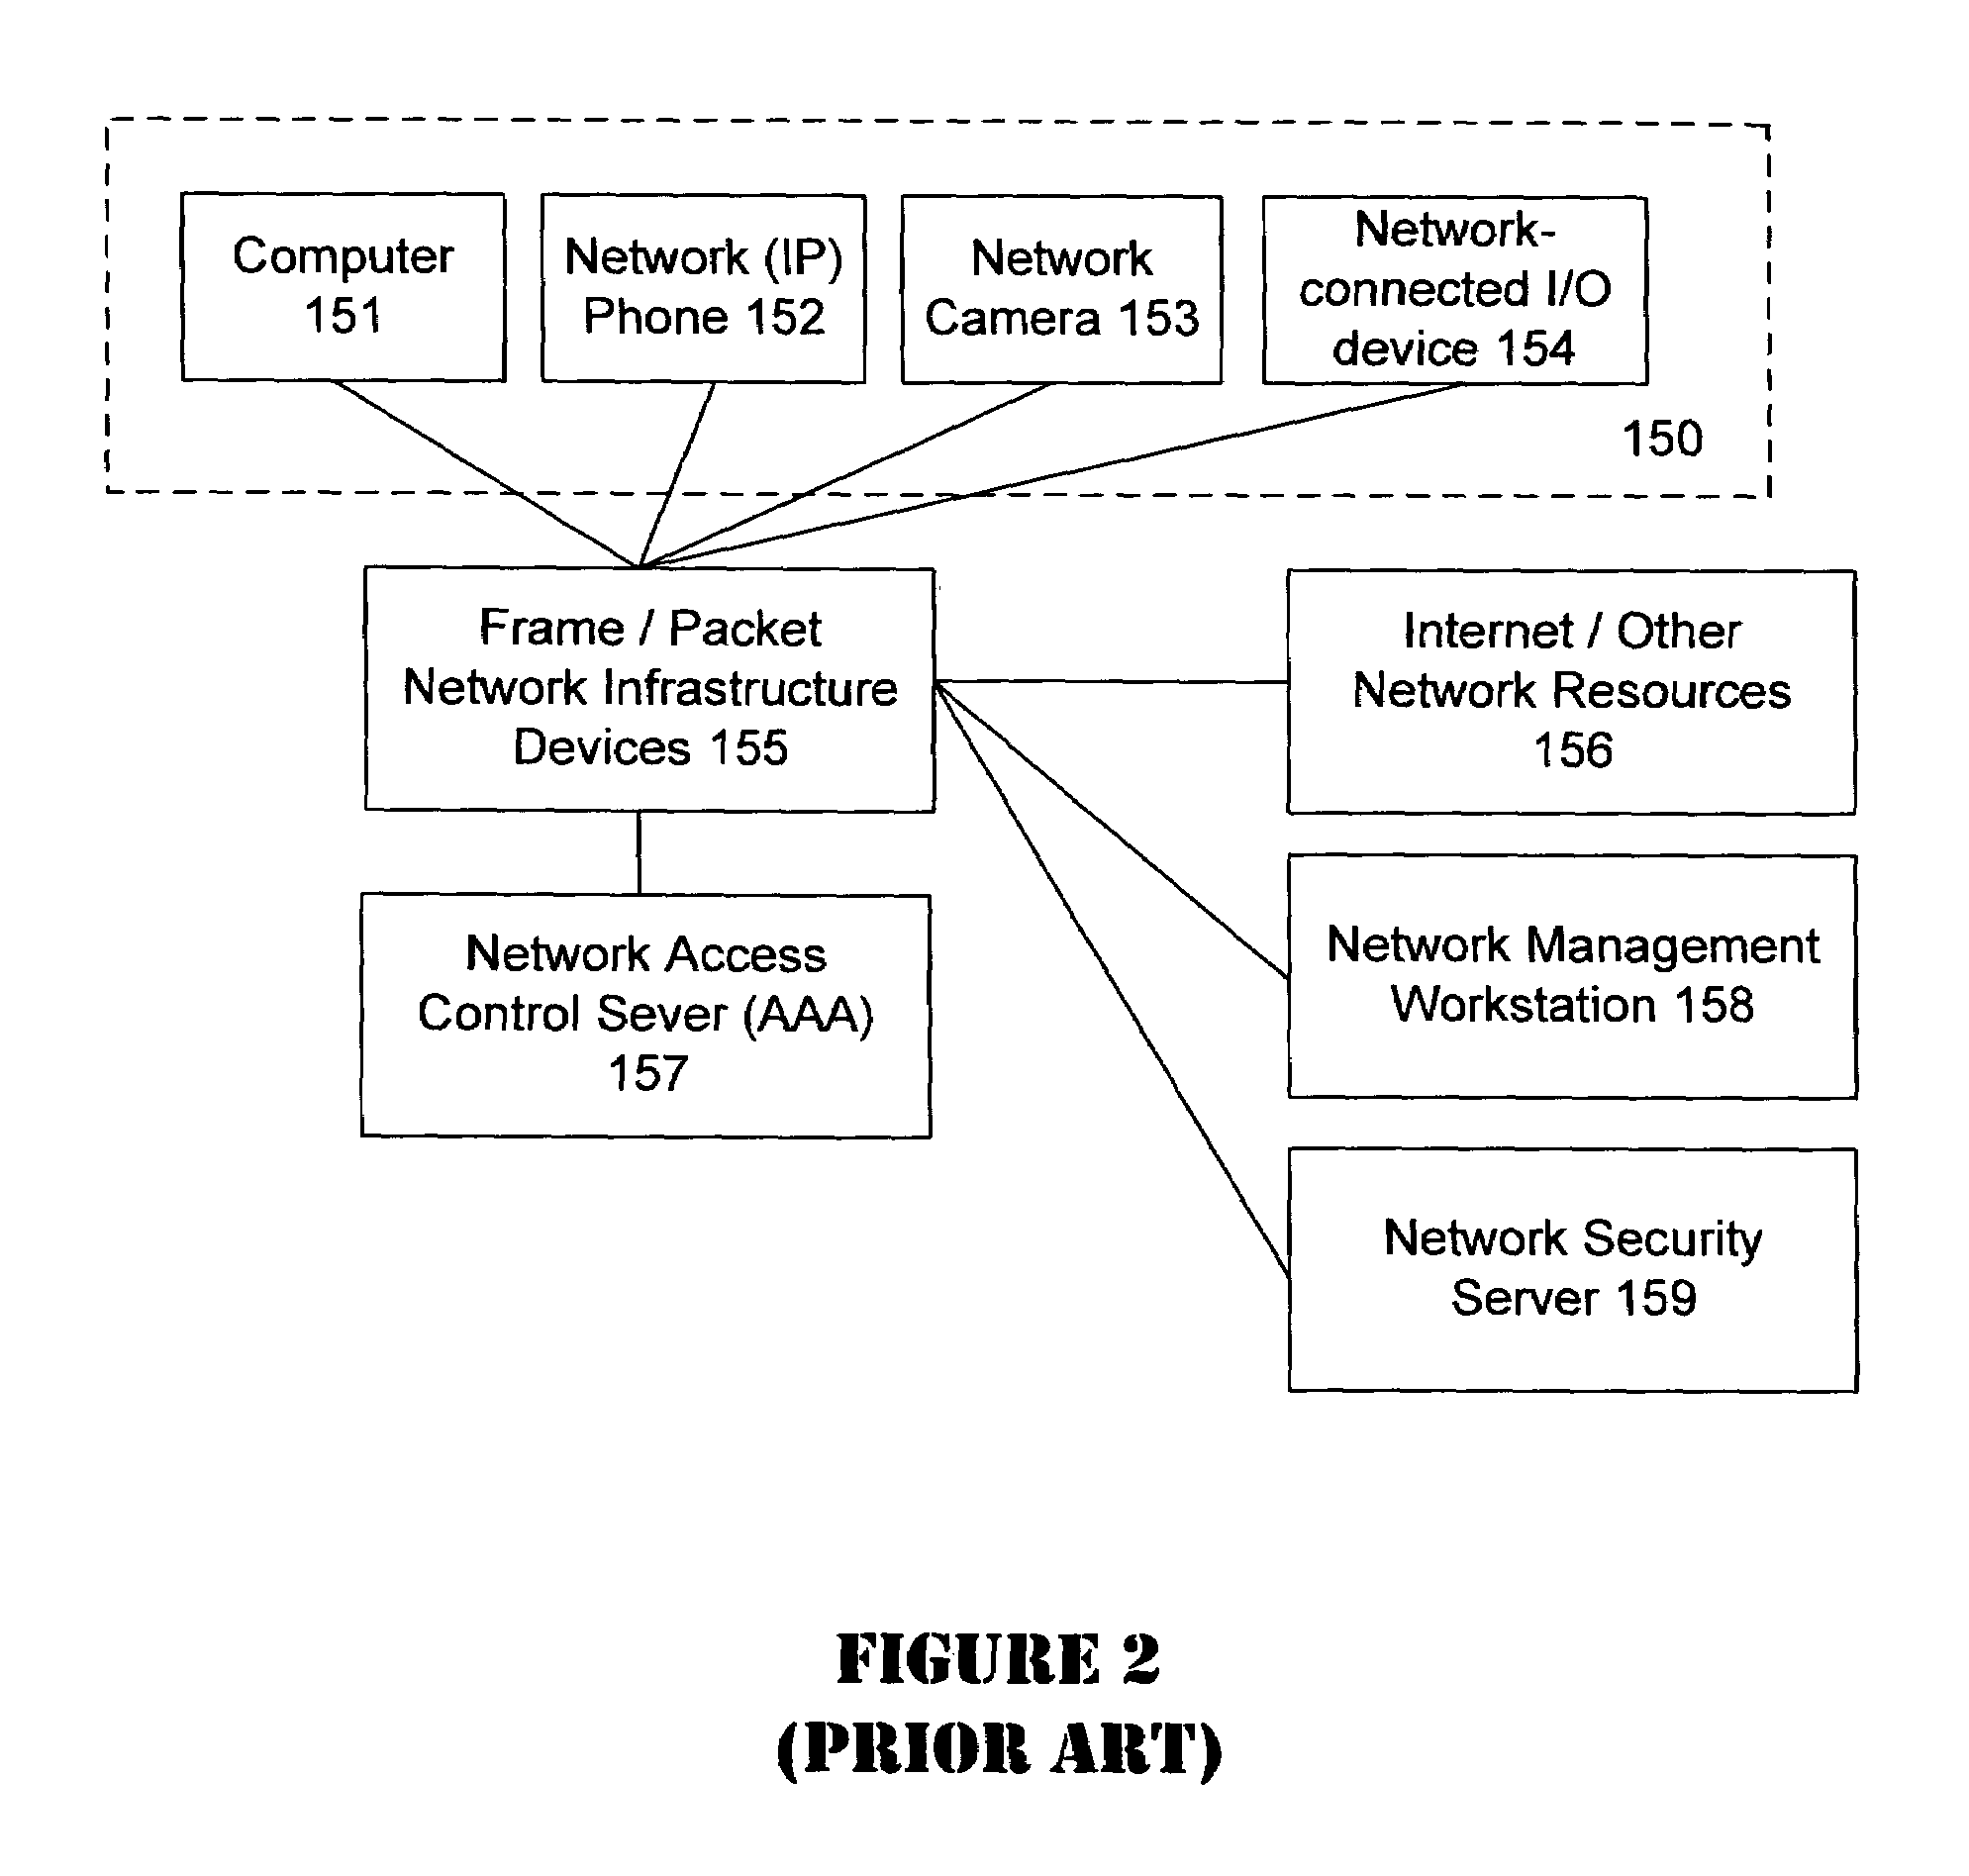 Unified network and physical premises access control server